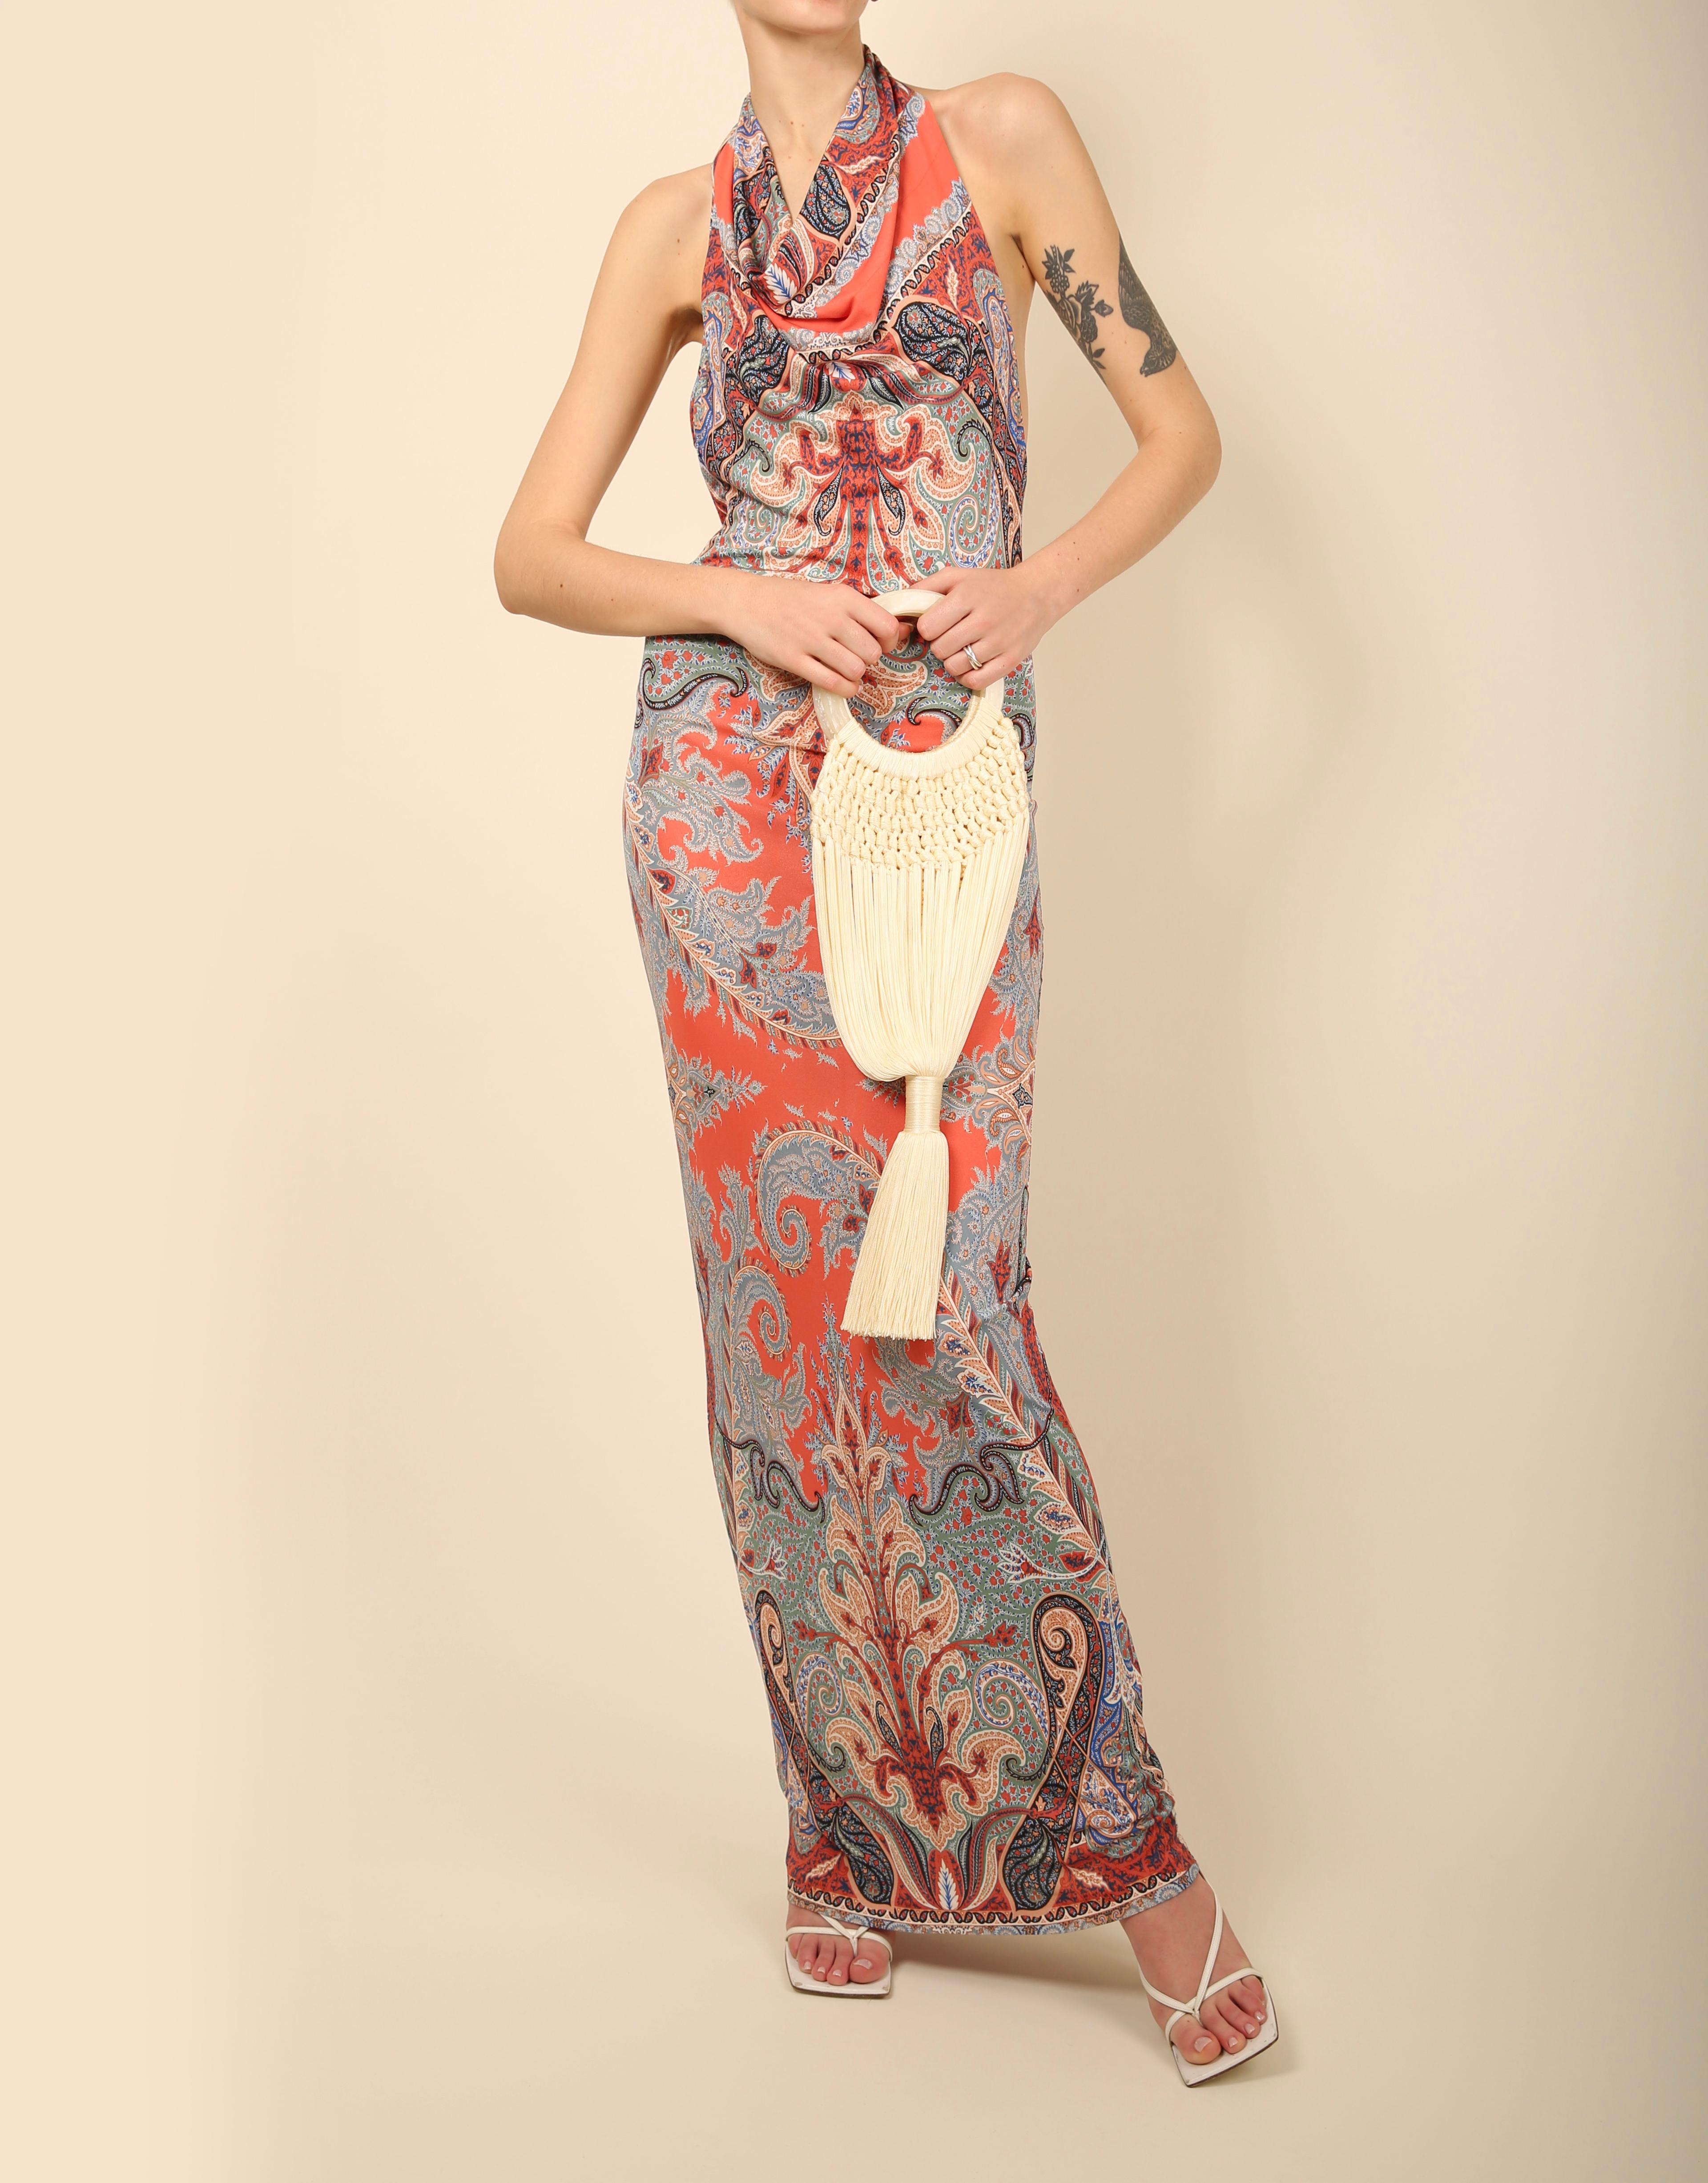 Etro paisley print red blue black white halter neck backless draped maxi dress In Excellent Condition For Sale In Paris, FR